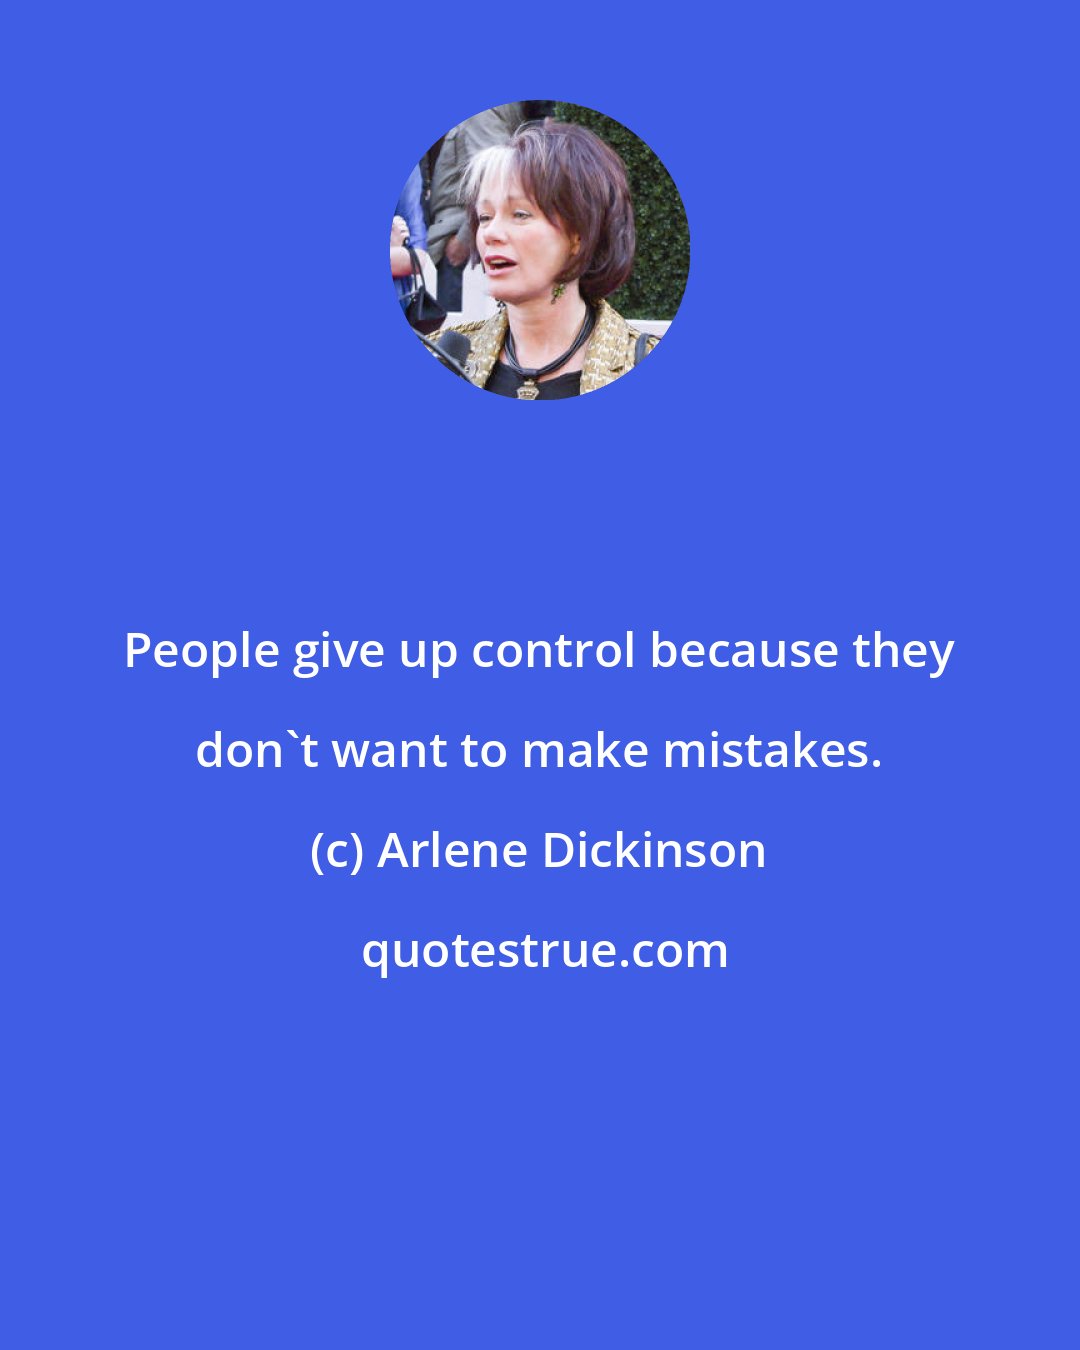 Arlene Dickinson: People give up control because they don't want to make mistakes.